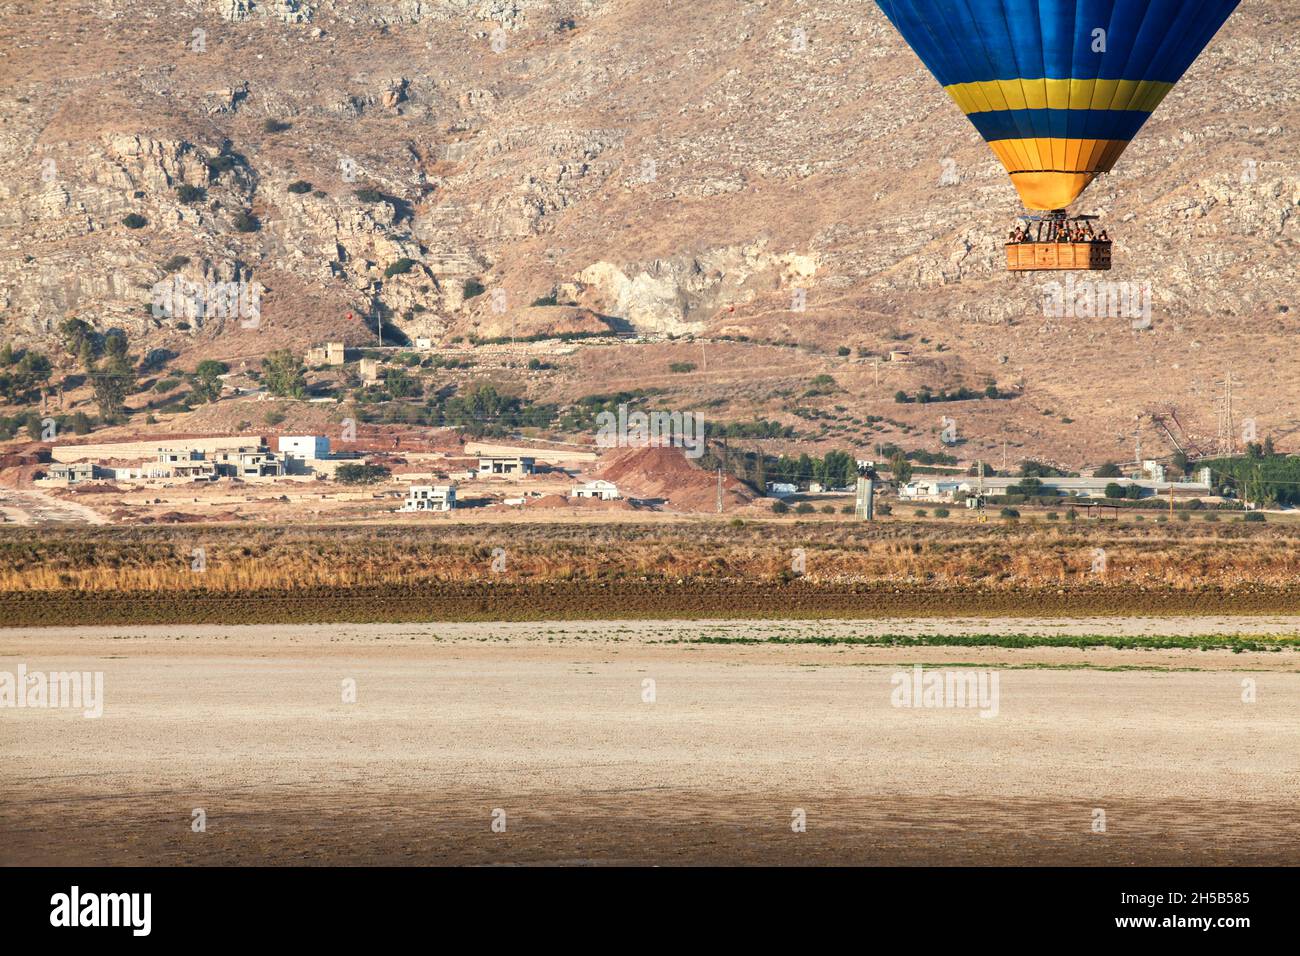 Hot air balloon photographed in the Jezreel Valley, Israel Mount Gilboa in the background Stock Photo